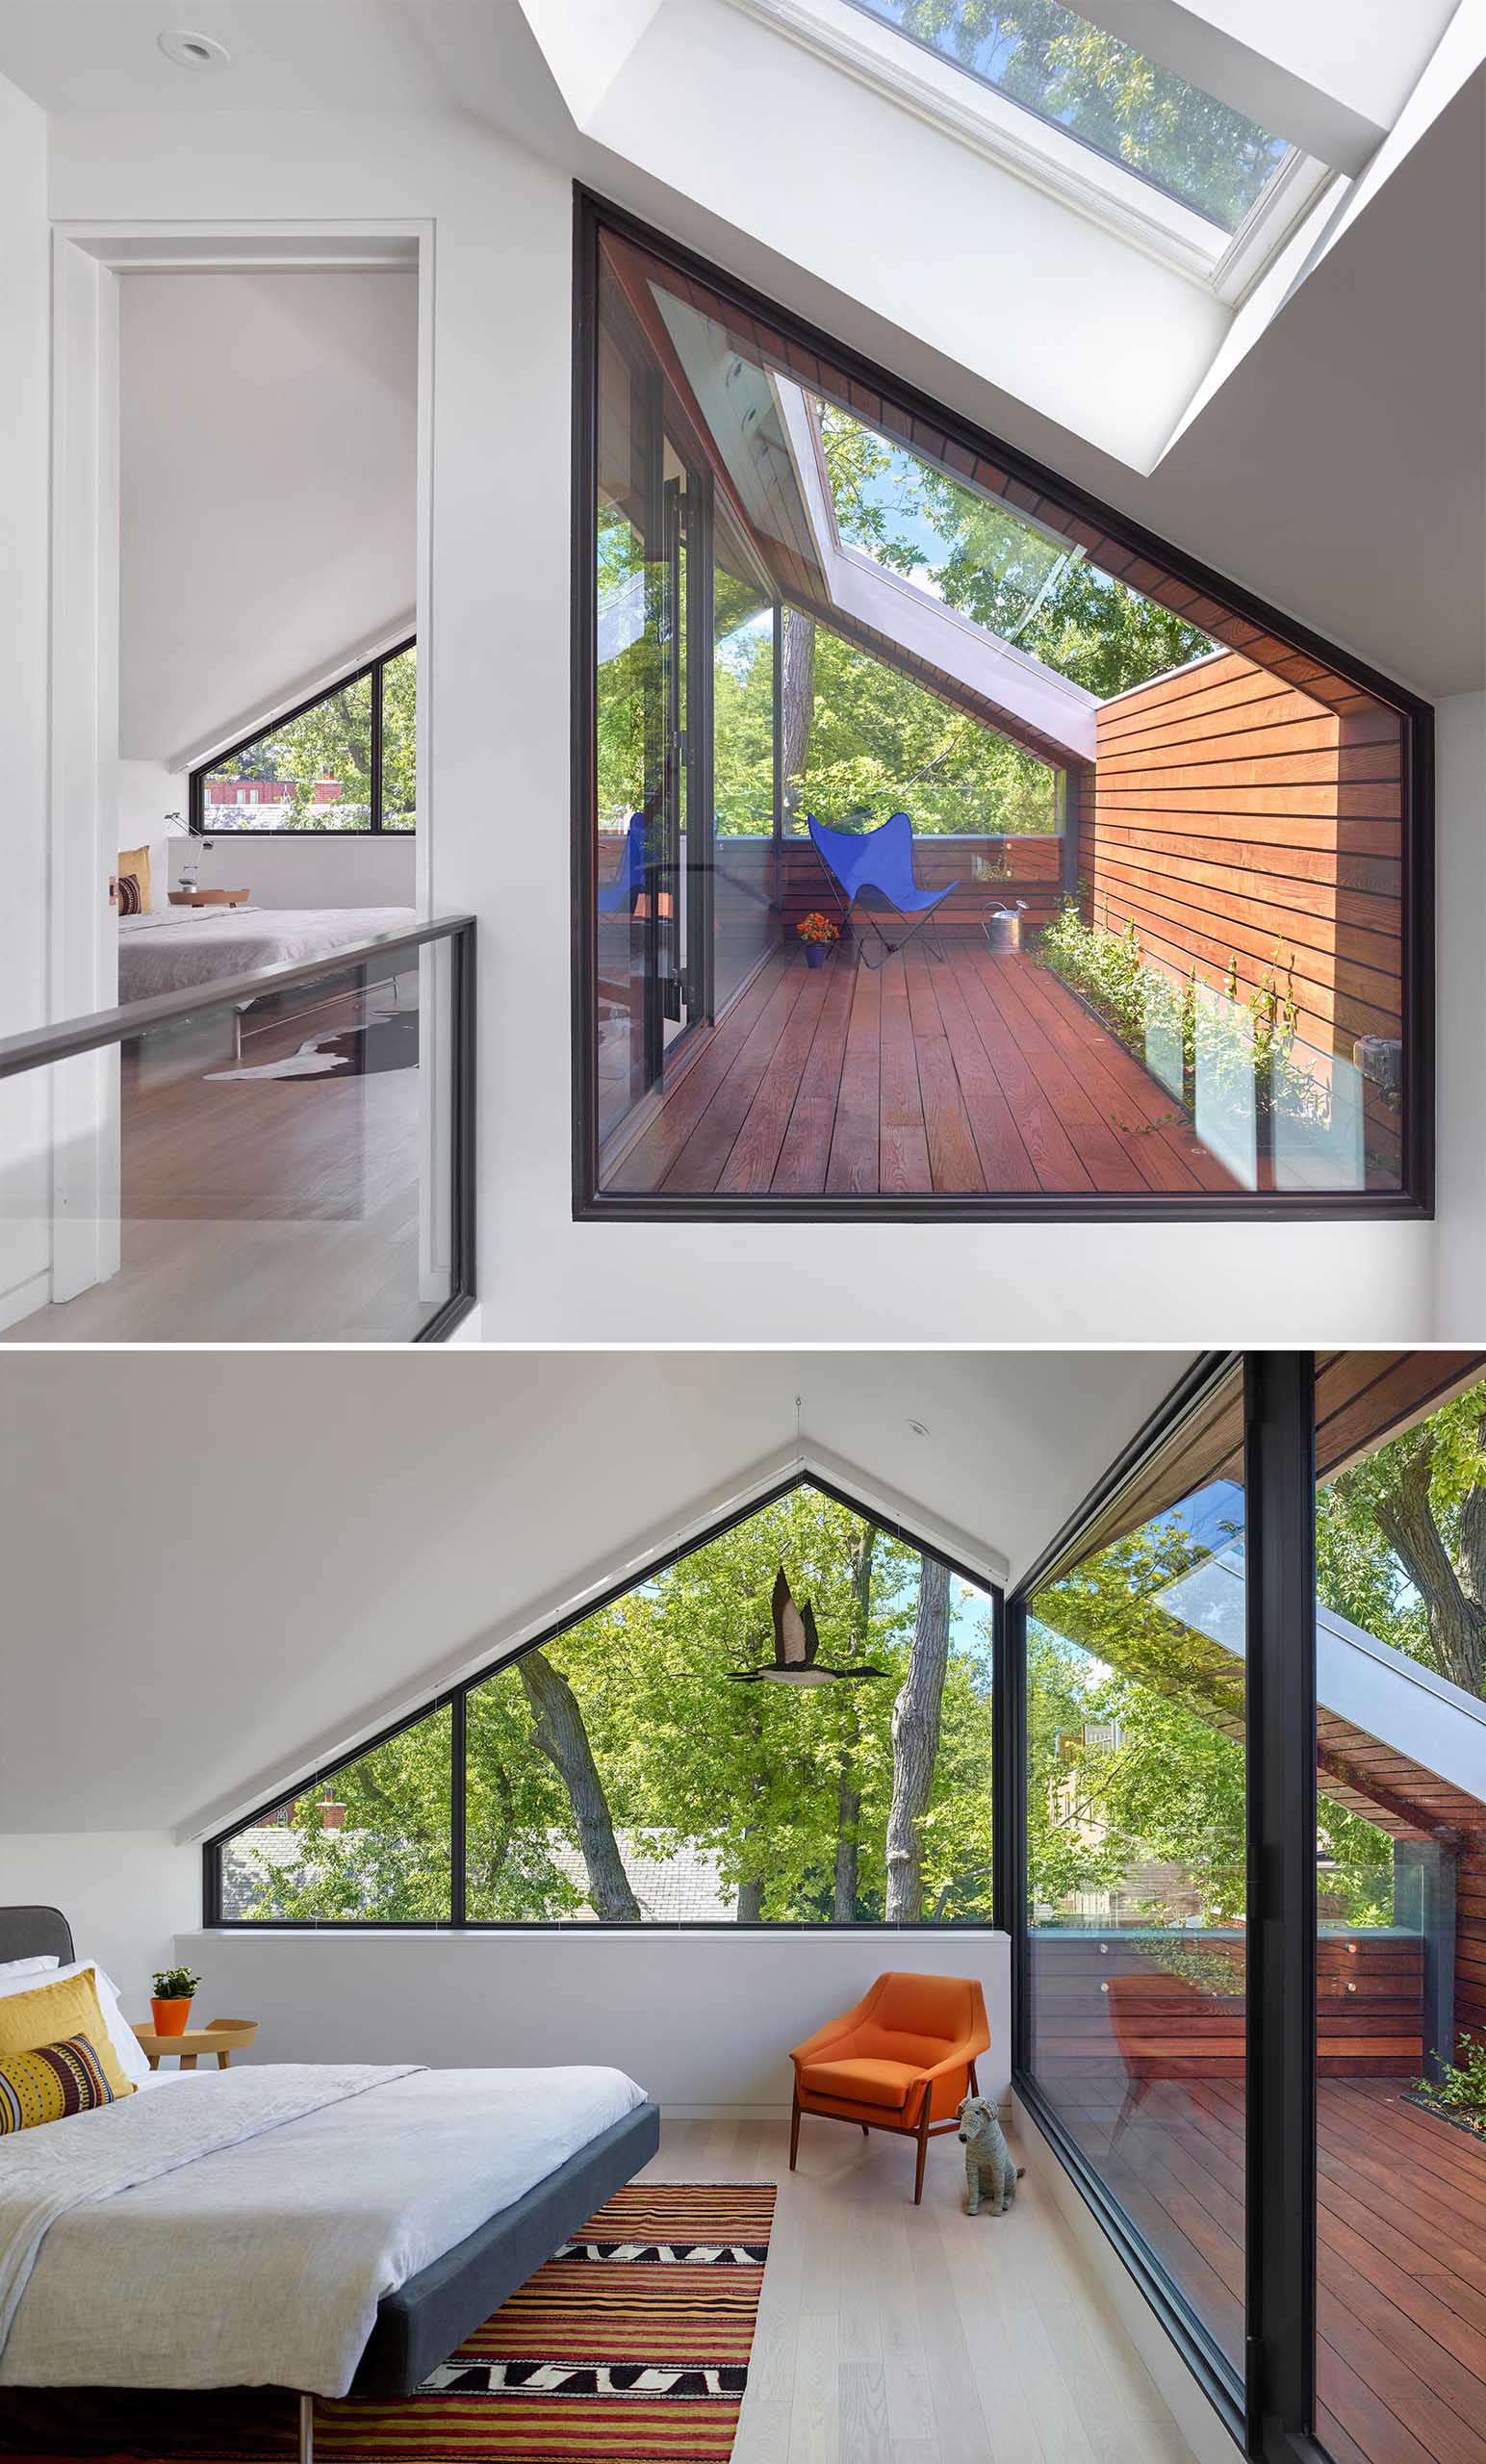 At the front of this modern house, half of the master bedroom is given over to an intimate exterior space clad in the warm ash, with a recessed planter and an opening carved into the roof for natural light. 